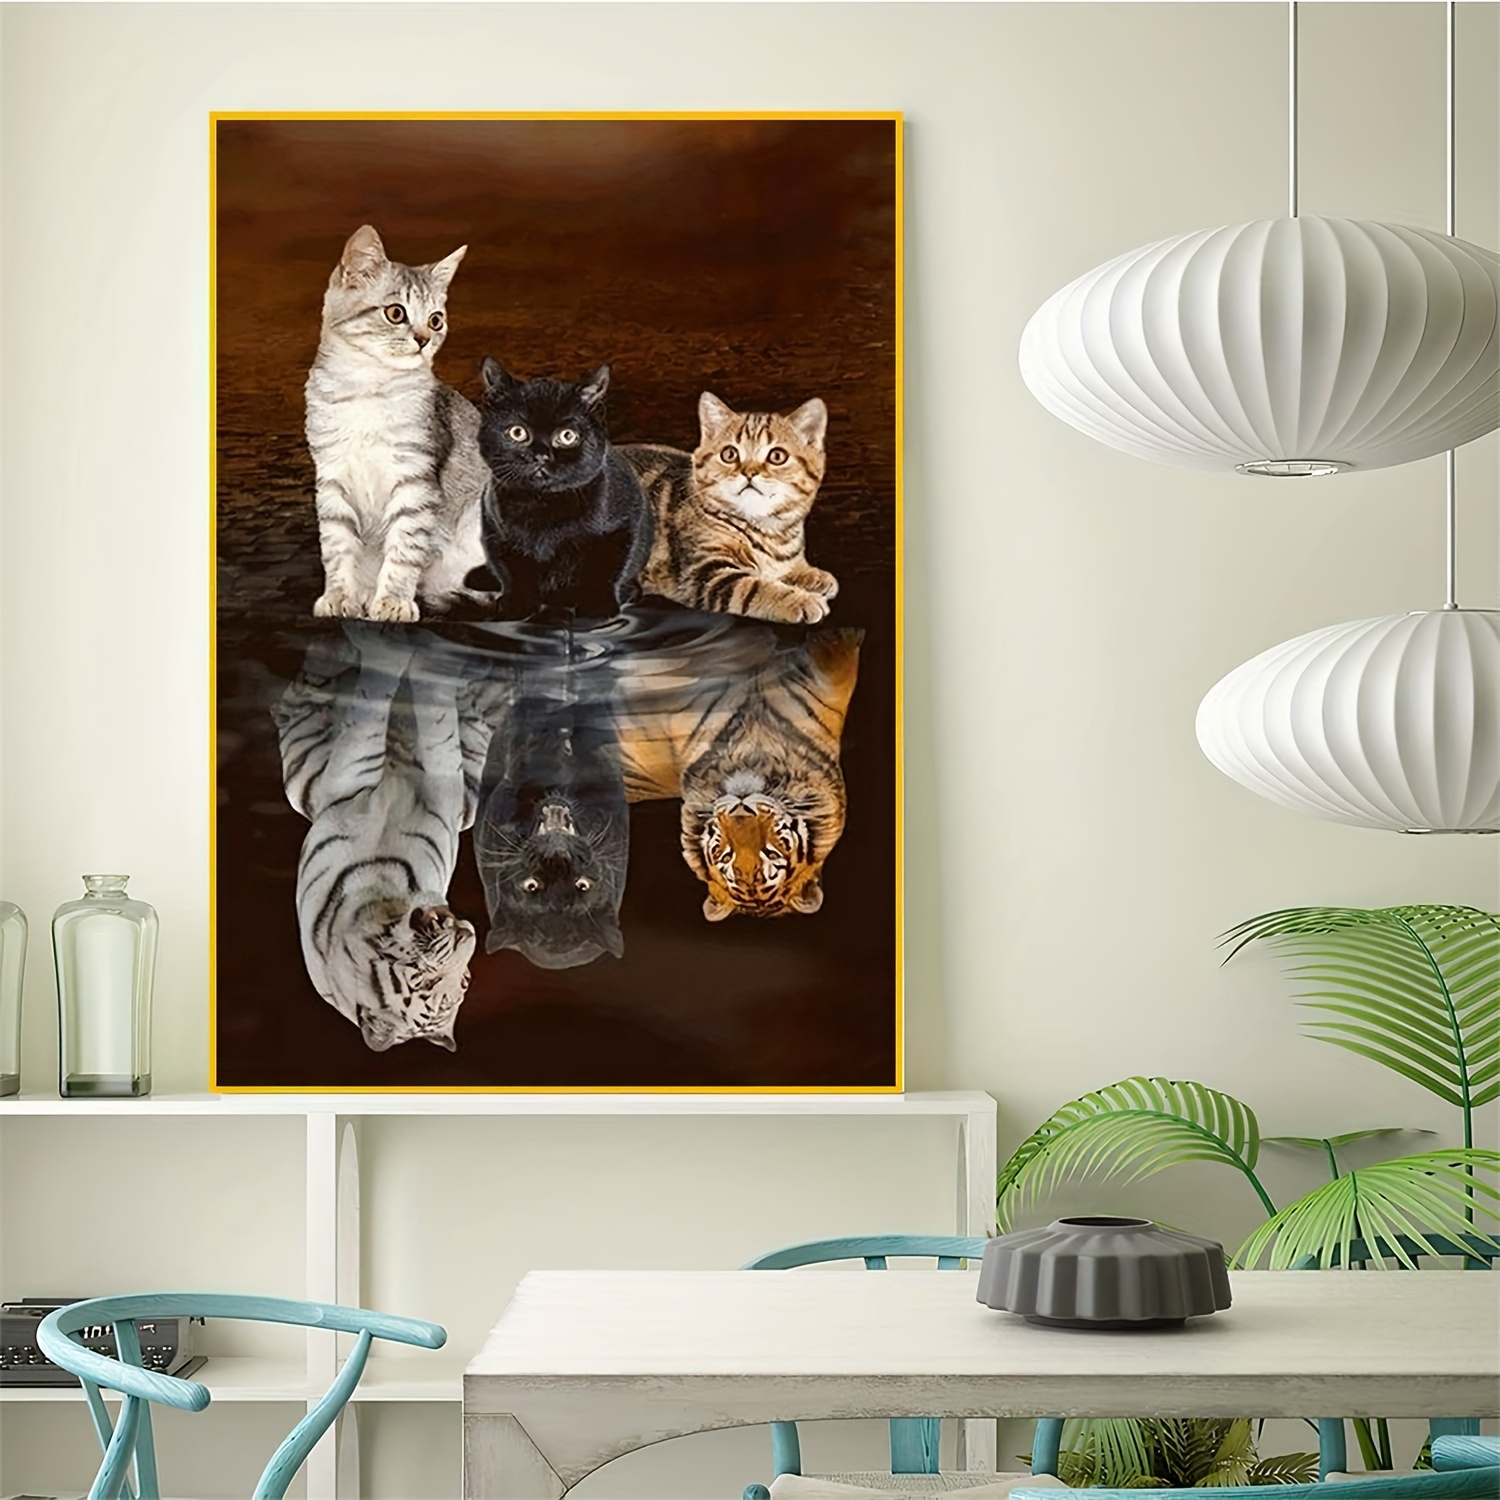 DIY 5D Diamond Painting by Number Kits, Painting Three Cats